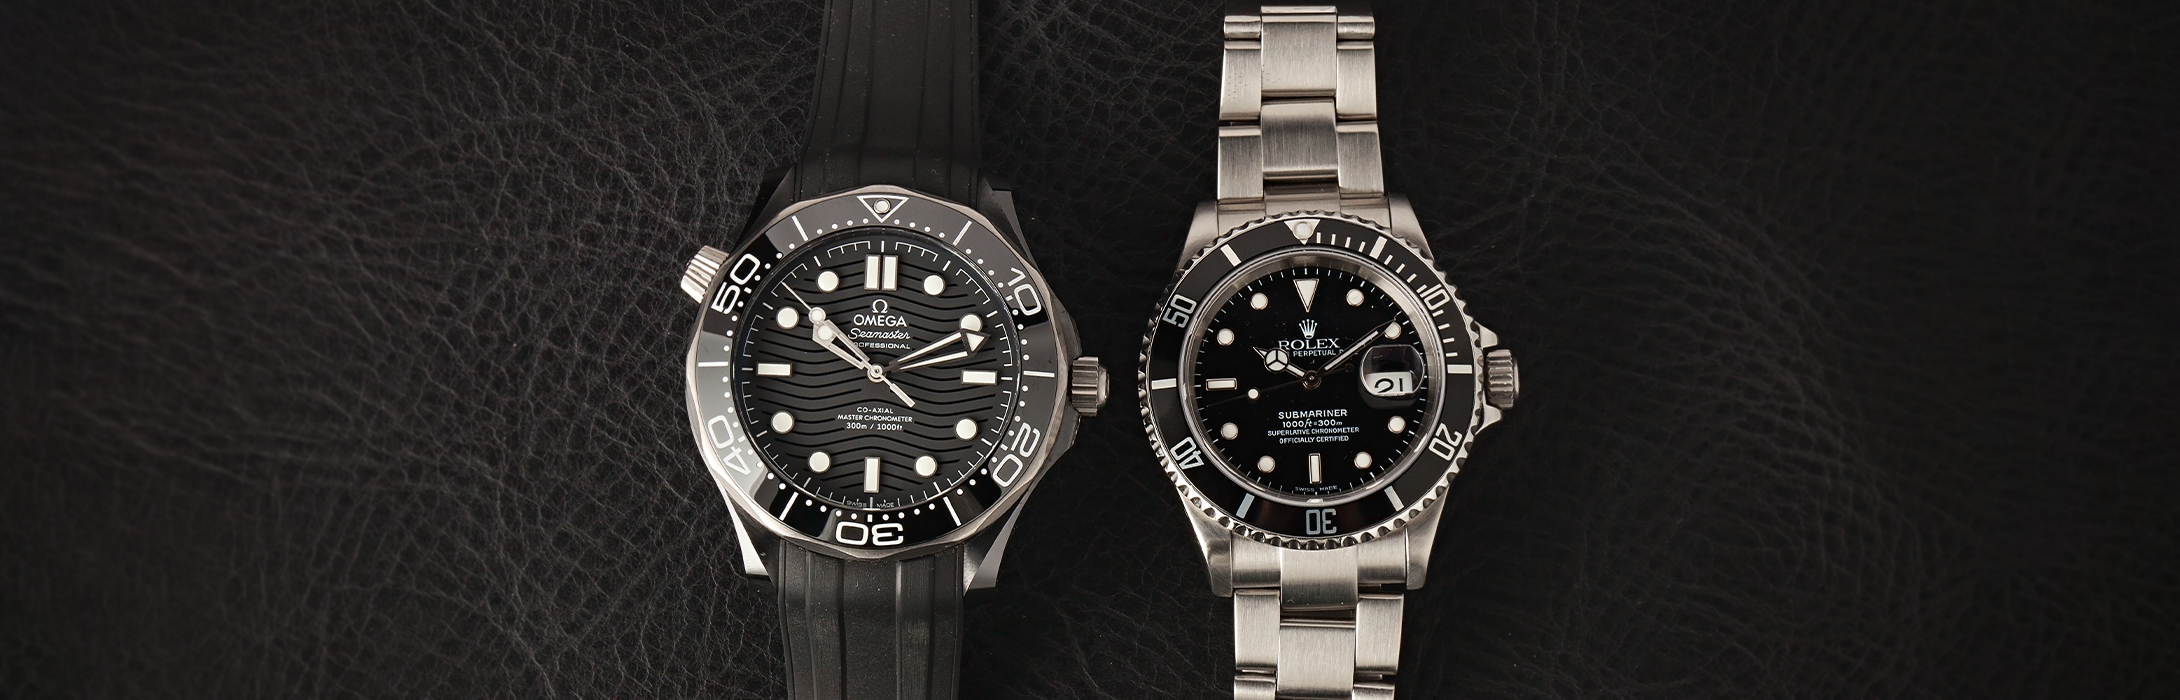 Submariner vs Seamaster: The Ultimate Buying Guide